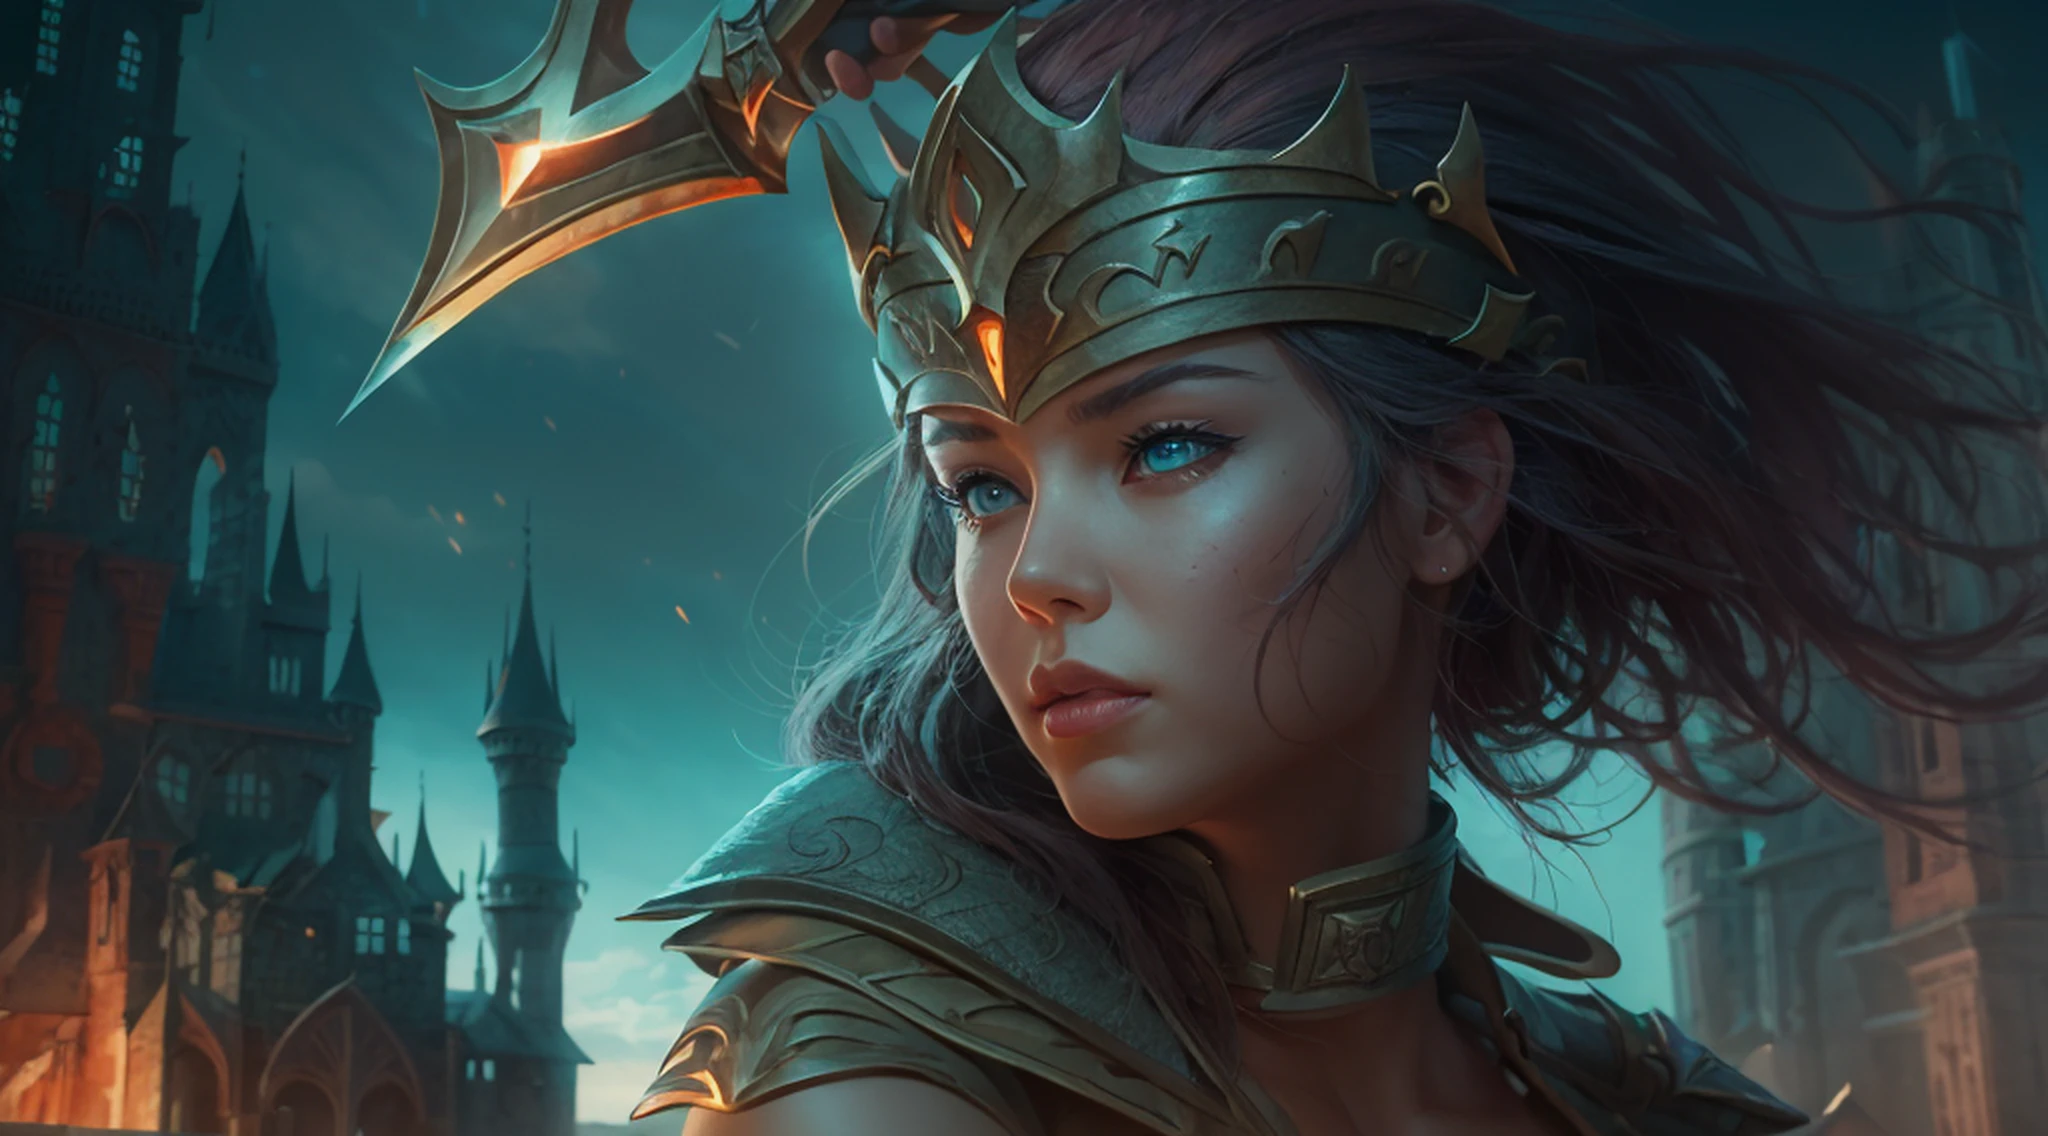 a woman in a fantasy setting with a sword and a castle, detailed digital 2d fantasy art, 4k fantasy art, high quality fantasy art, 2. 5 d cgi anime fantasy artwork, detailed fantasy art, digital 2d fantasy art, hd fantasy art, fantasy game art, 8k fantasy art, fantasy art behance, epic fantasy art style hd